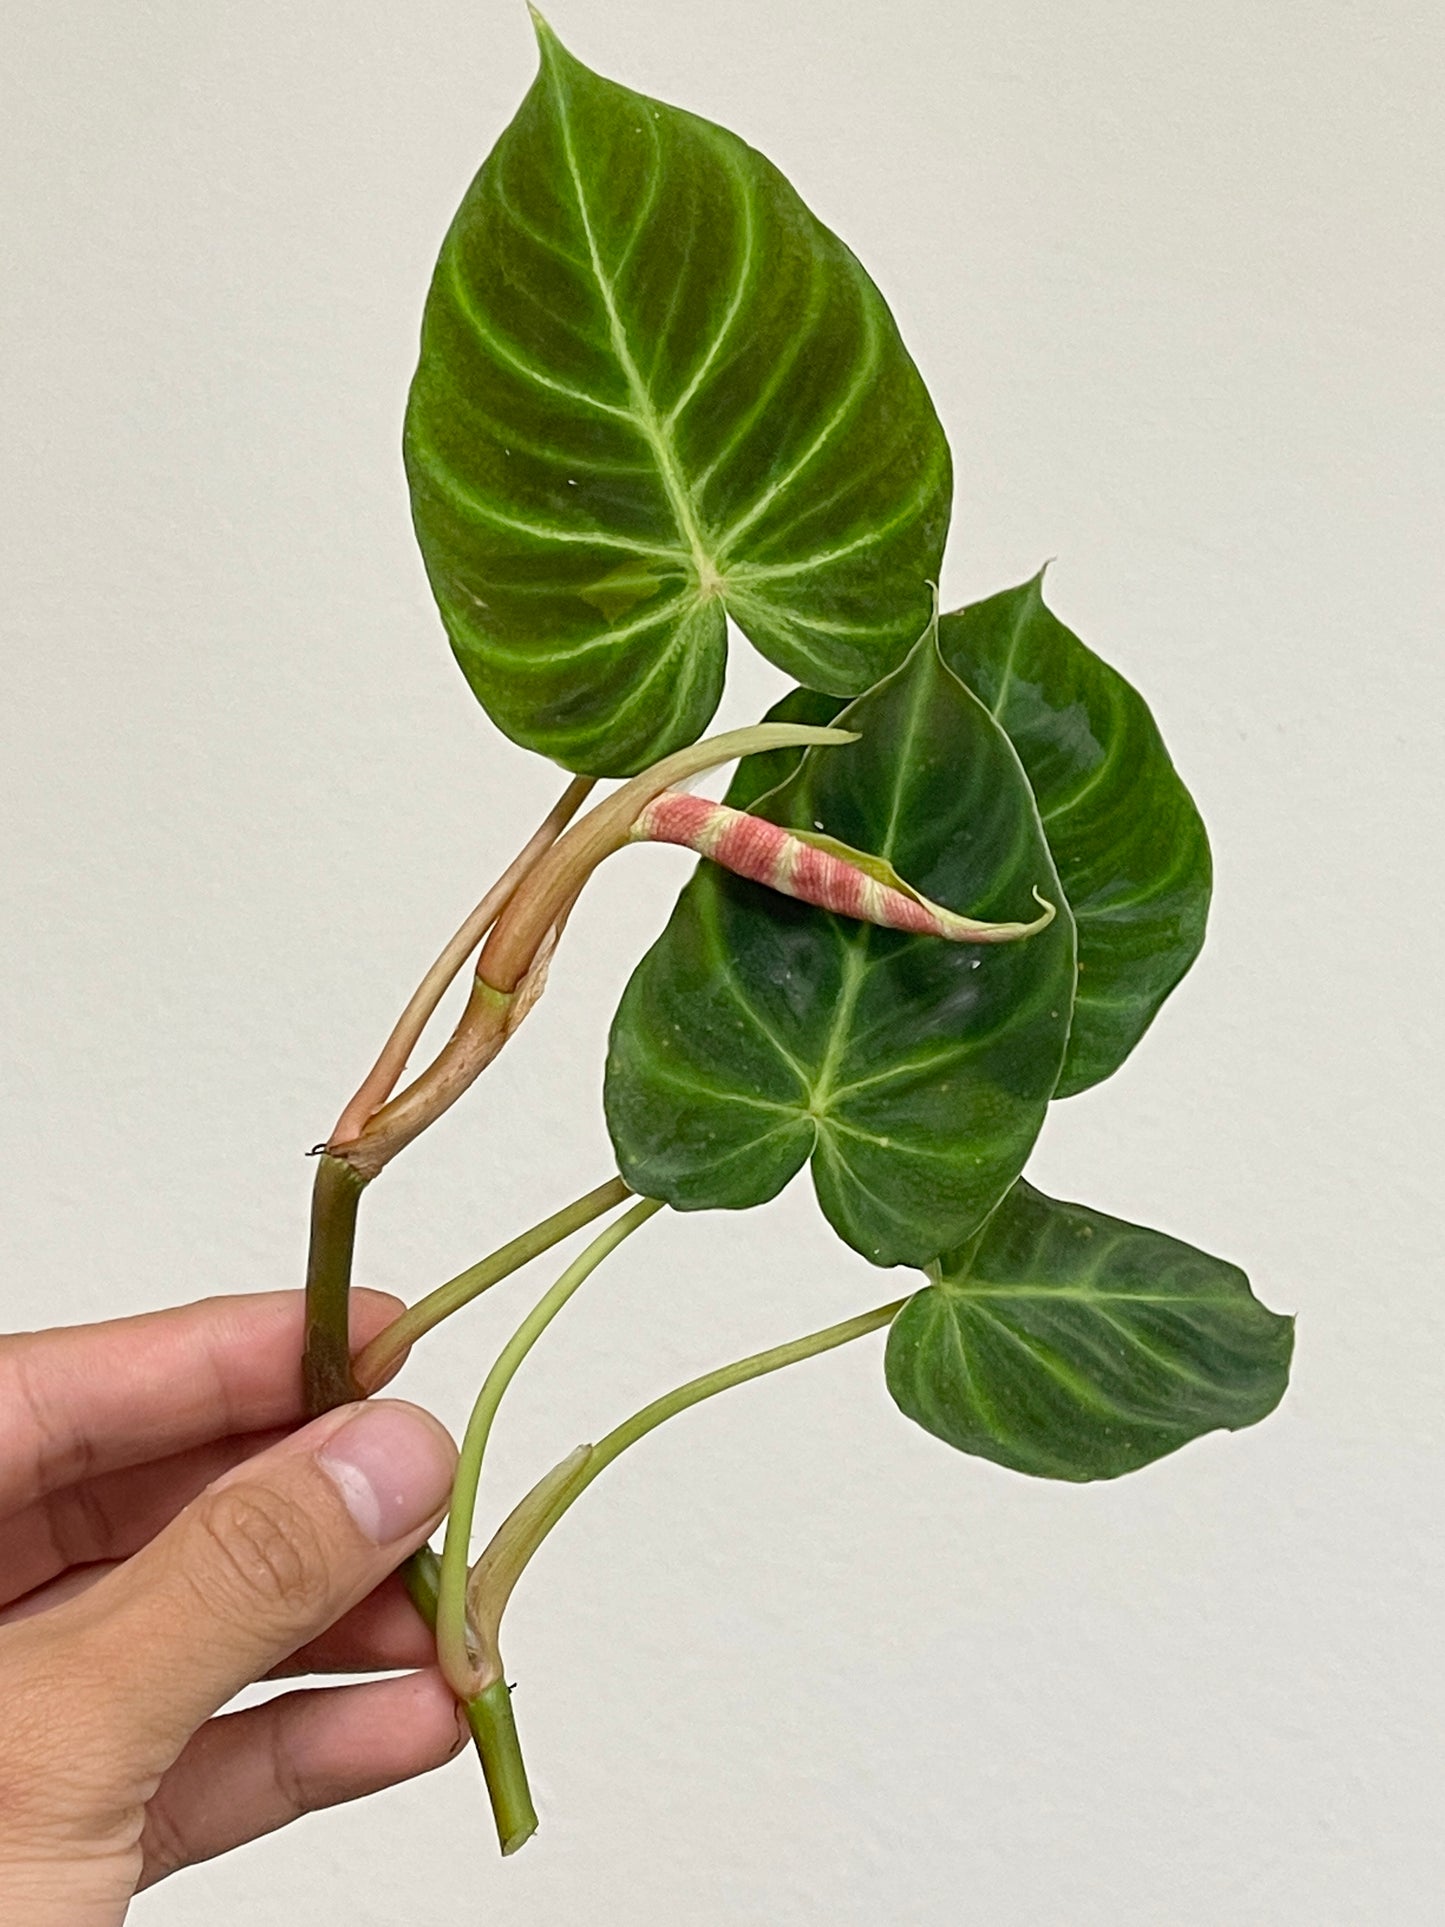 Philodendron Verrucosum Cobra unrooted double node with 2 new growth points (First pic is mother plant)